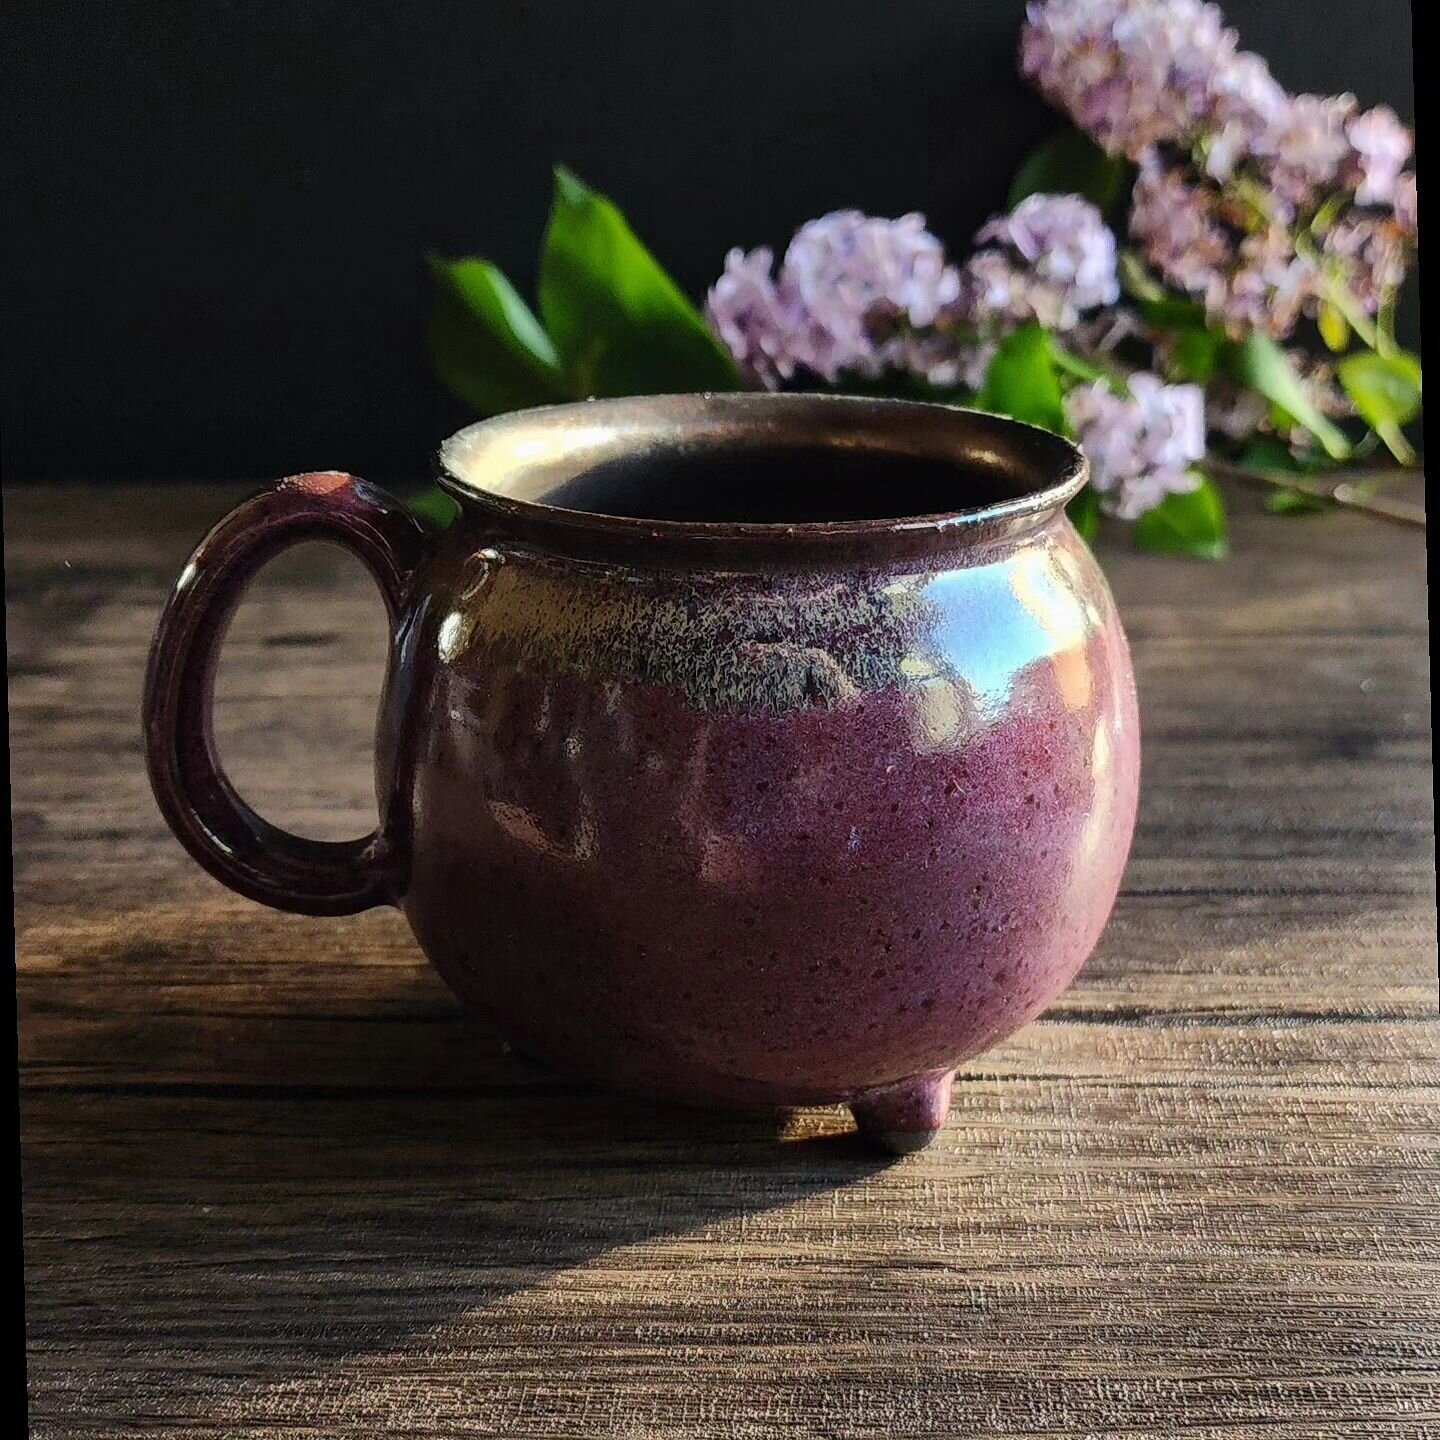 May 19, 2023
I had previously typed up a whole thing about my week, but IG is lame and wouldn't post it. 
Not that I've uninstalled and reinstalled the app, I don't entirely remember what I said. 

Here's a mug. I'm still working on more. Thank you a